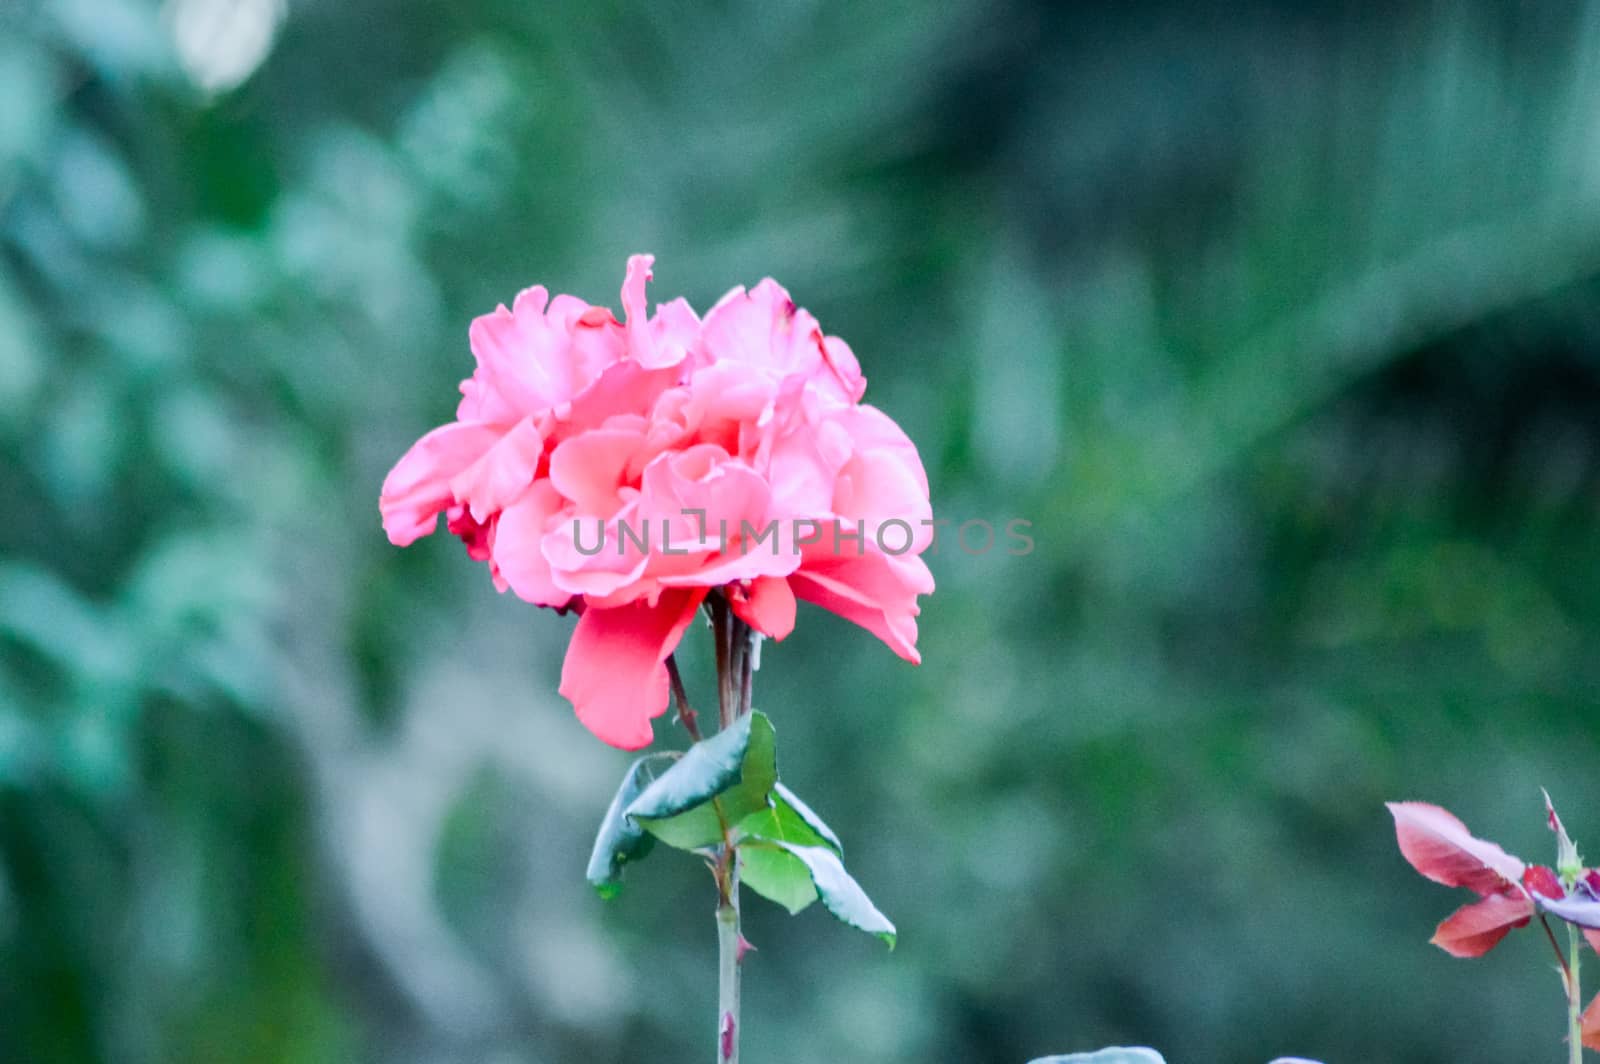 Beautiful red roses in the summer garden. close up pink rose and buds on green background. flower garden in the botanical garden. summer time concept.